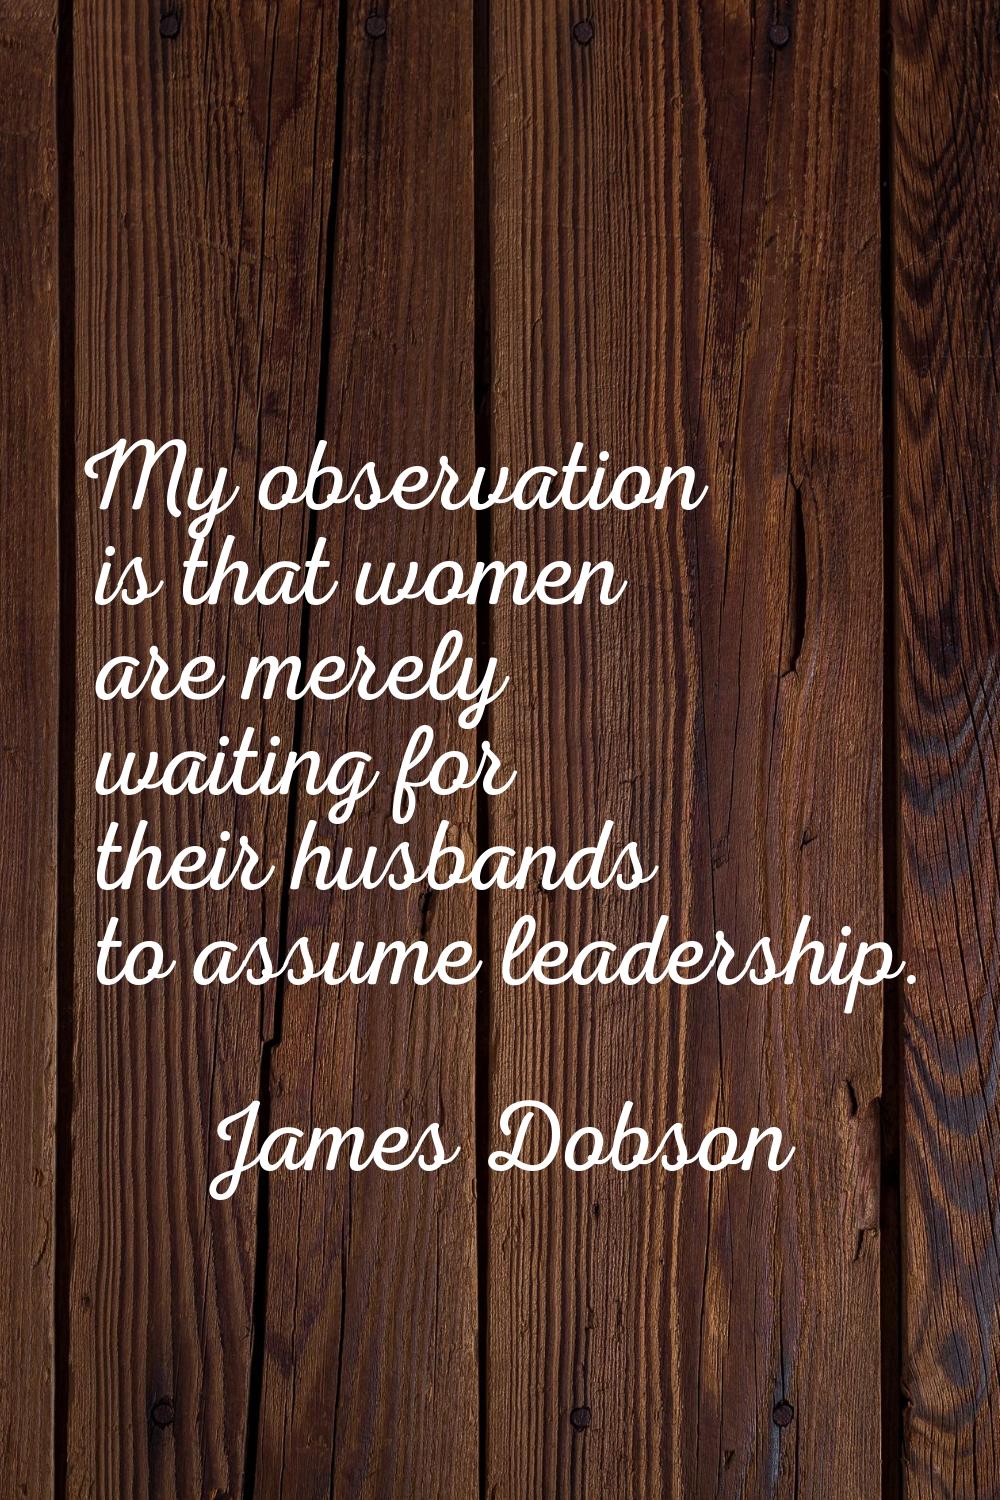 My observation is that women are merely waiting for their husbands to assume leadership.